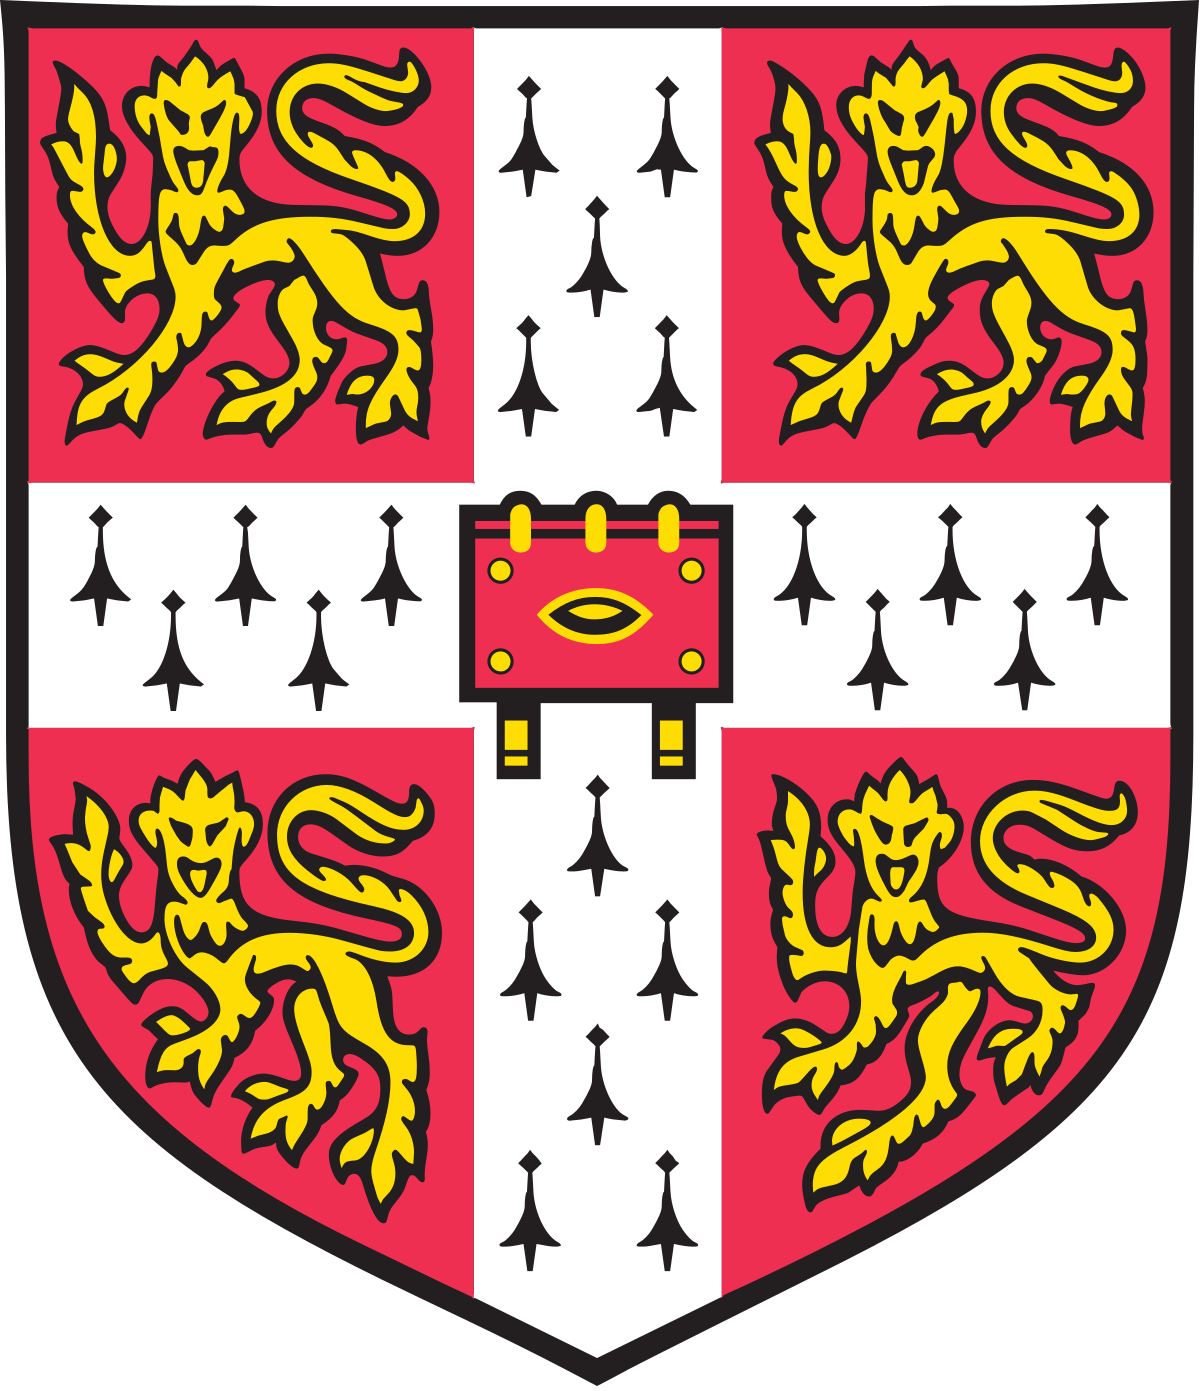 Lecturer in Housing and Planning Policy - new opportunity at the University of Cambridge